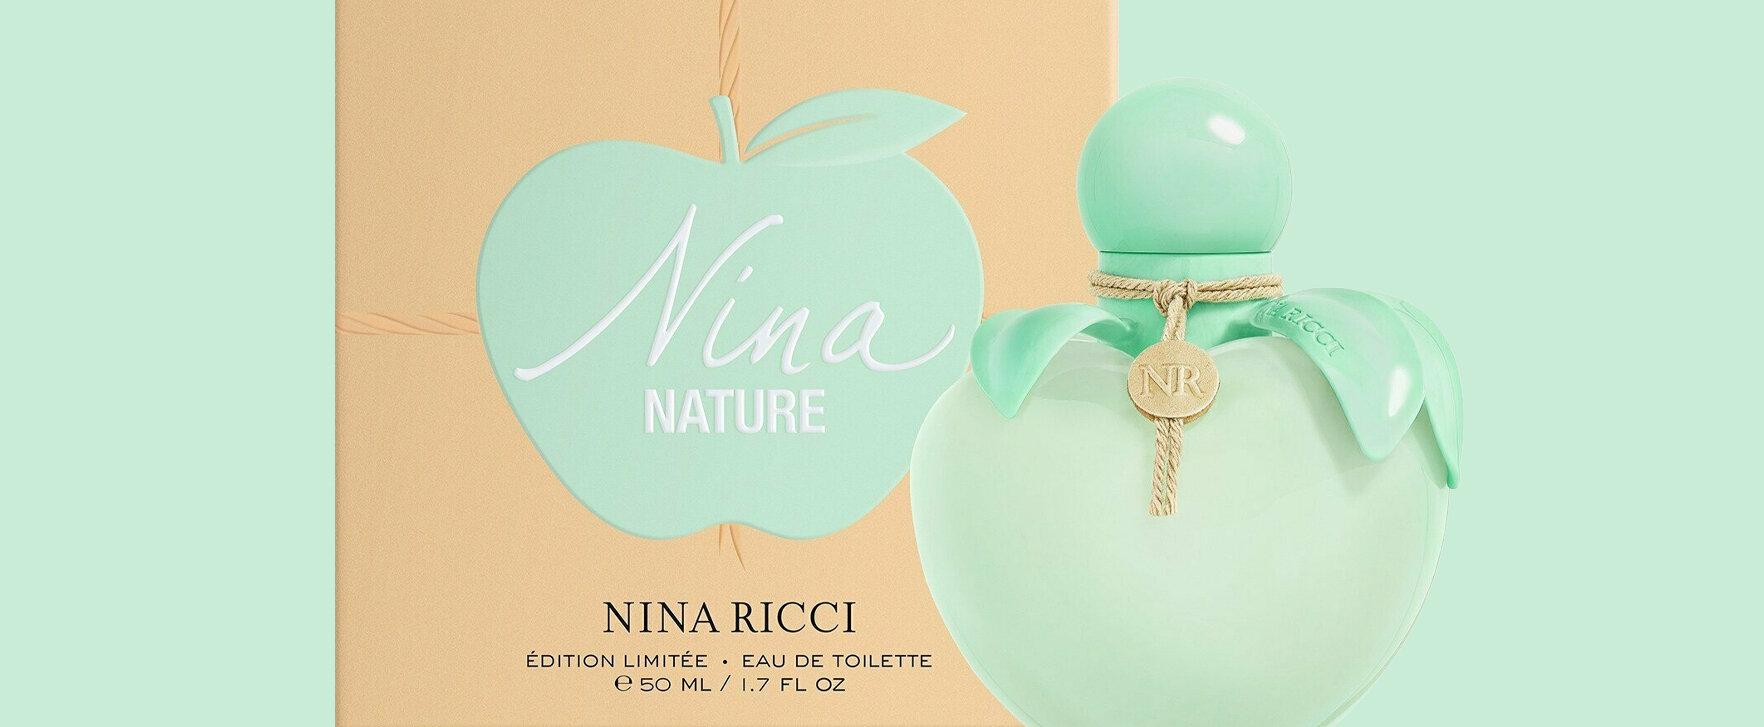 Eco-friendly and Fresh: Nina Ricci Launches the Fragrance “Nina Nature” in a Limited Edition